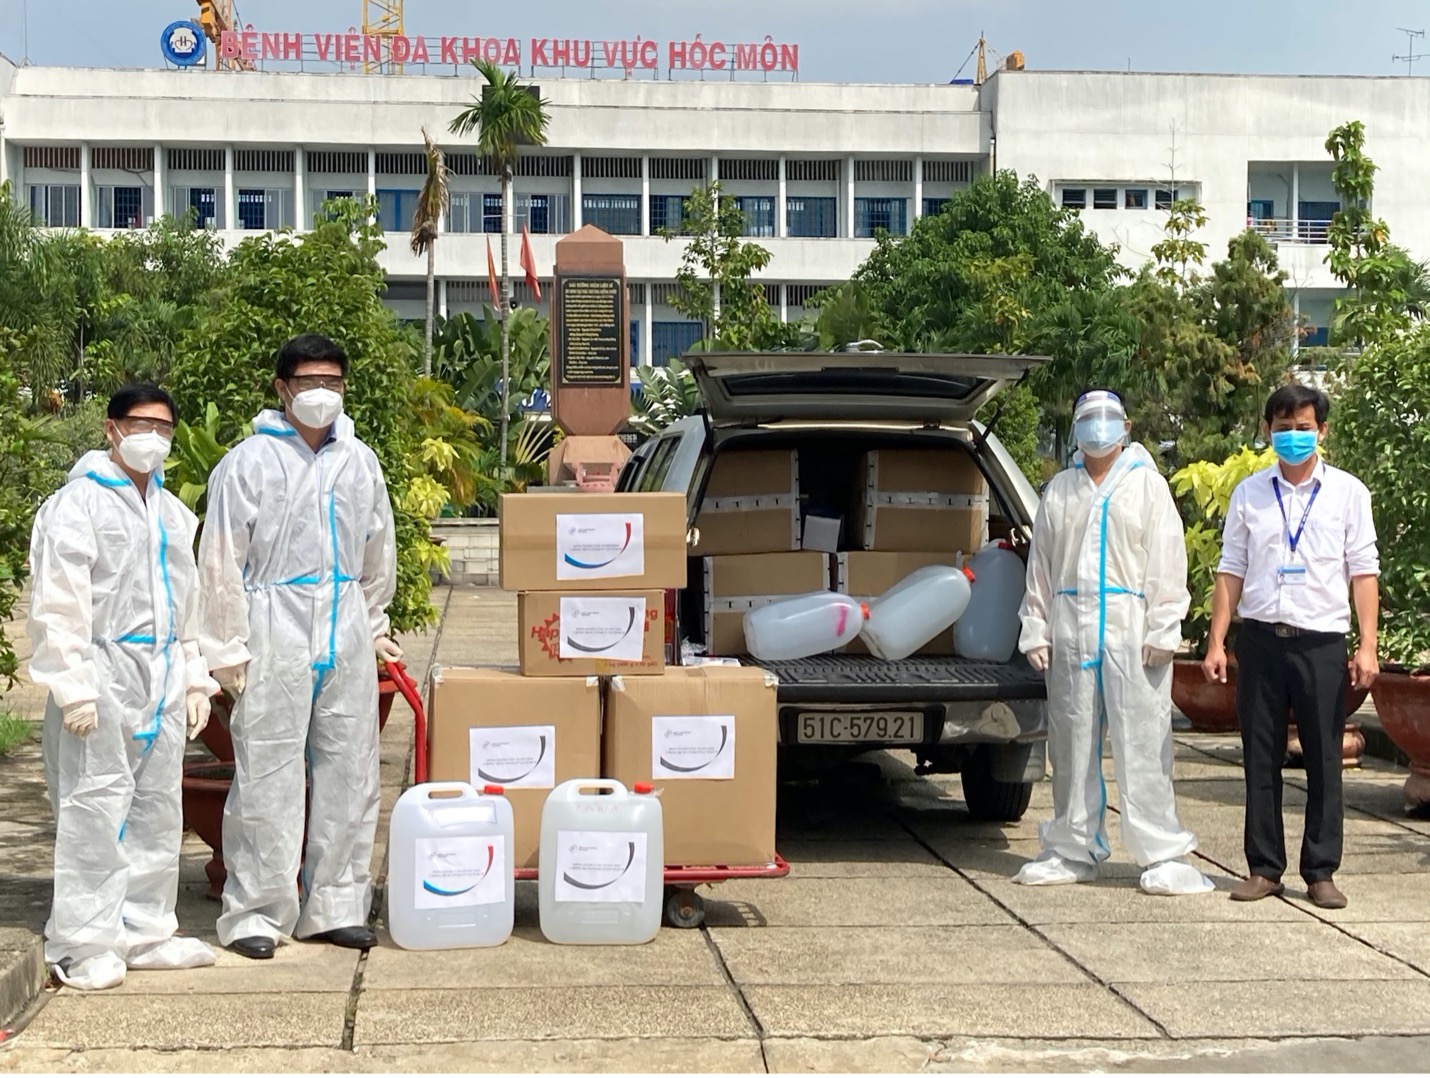 BSL handed over medical equipment and supplies to support the frontline against the COVID-19 pandemic in HCMC